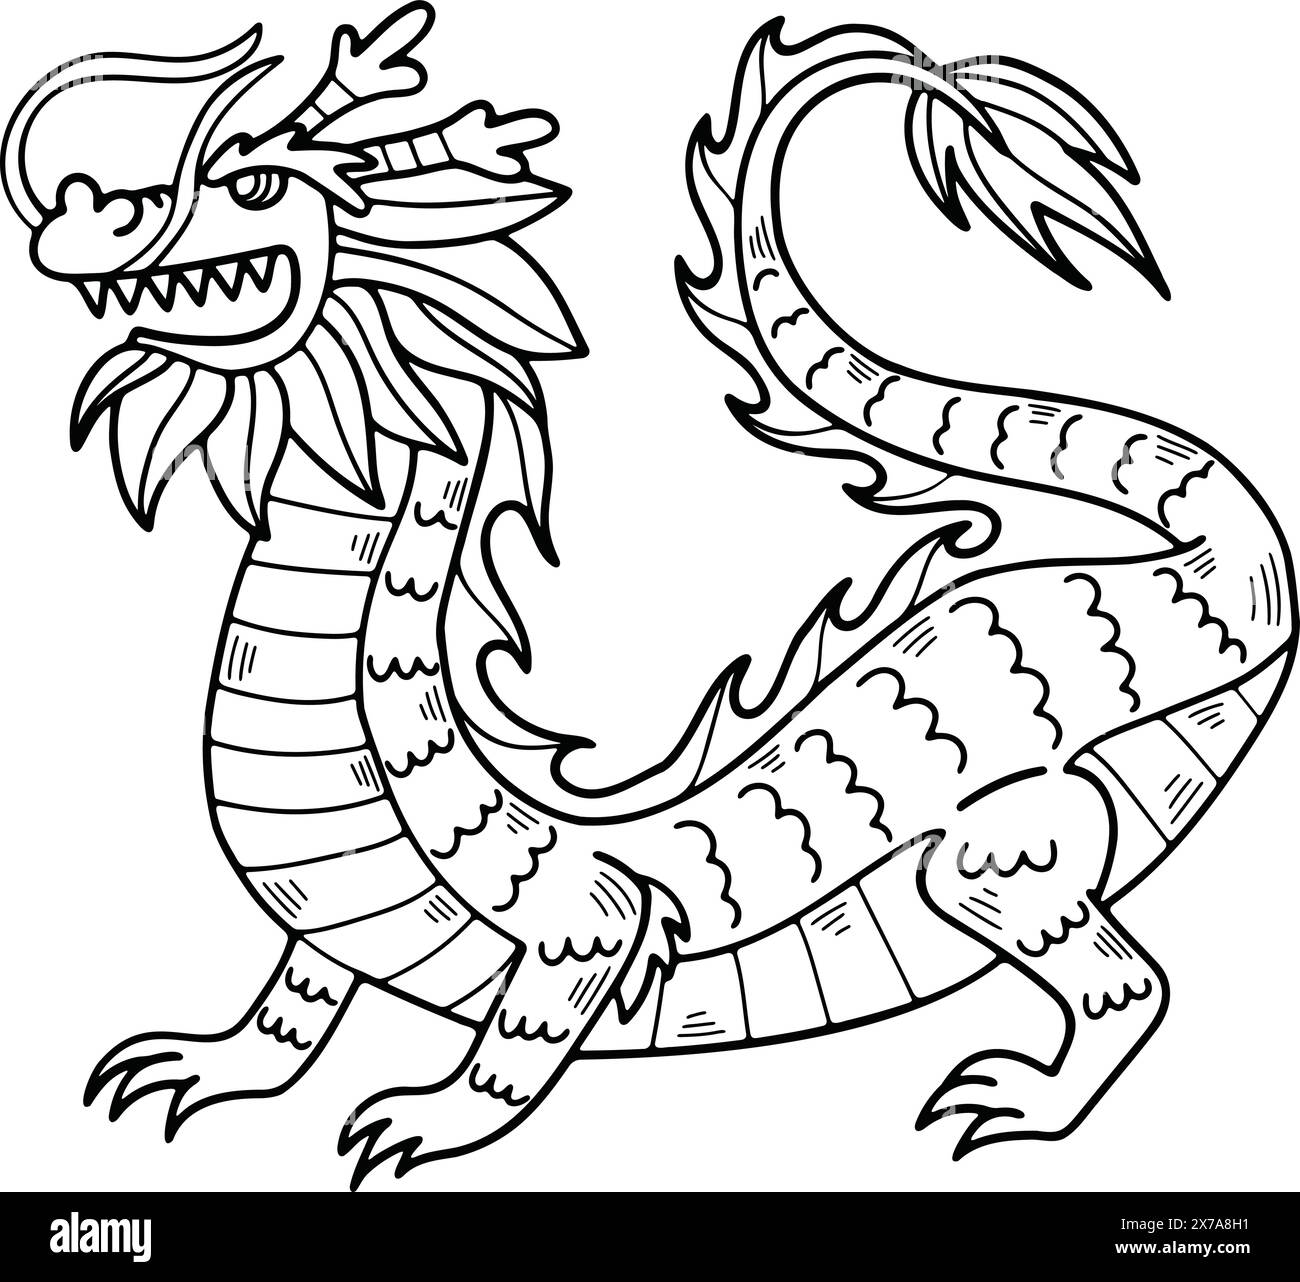 a Chinese or Japanese style dragon illustration Hand drawn in line style Stock Vector